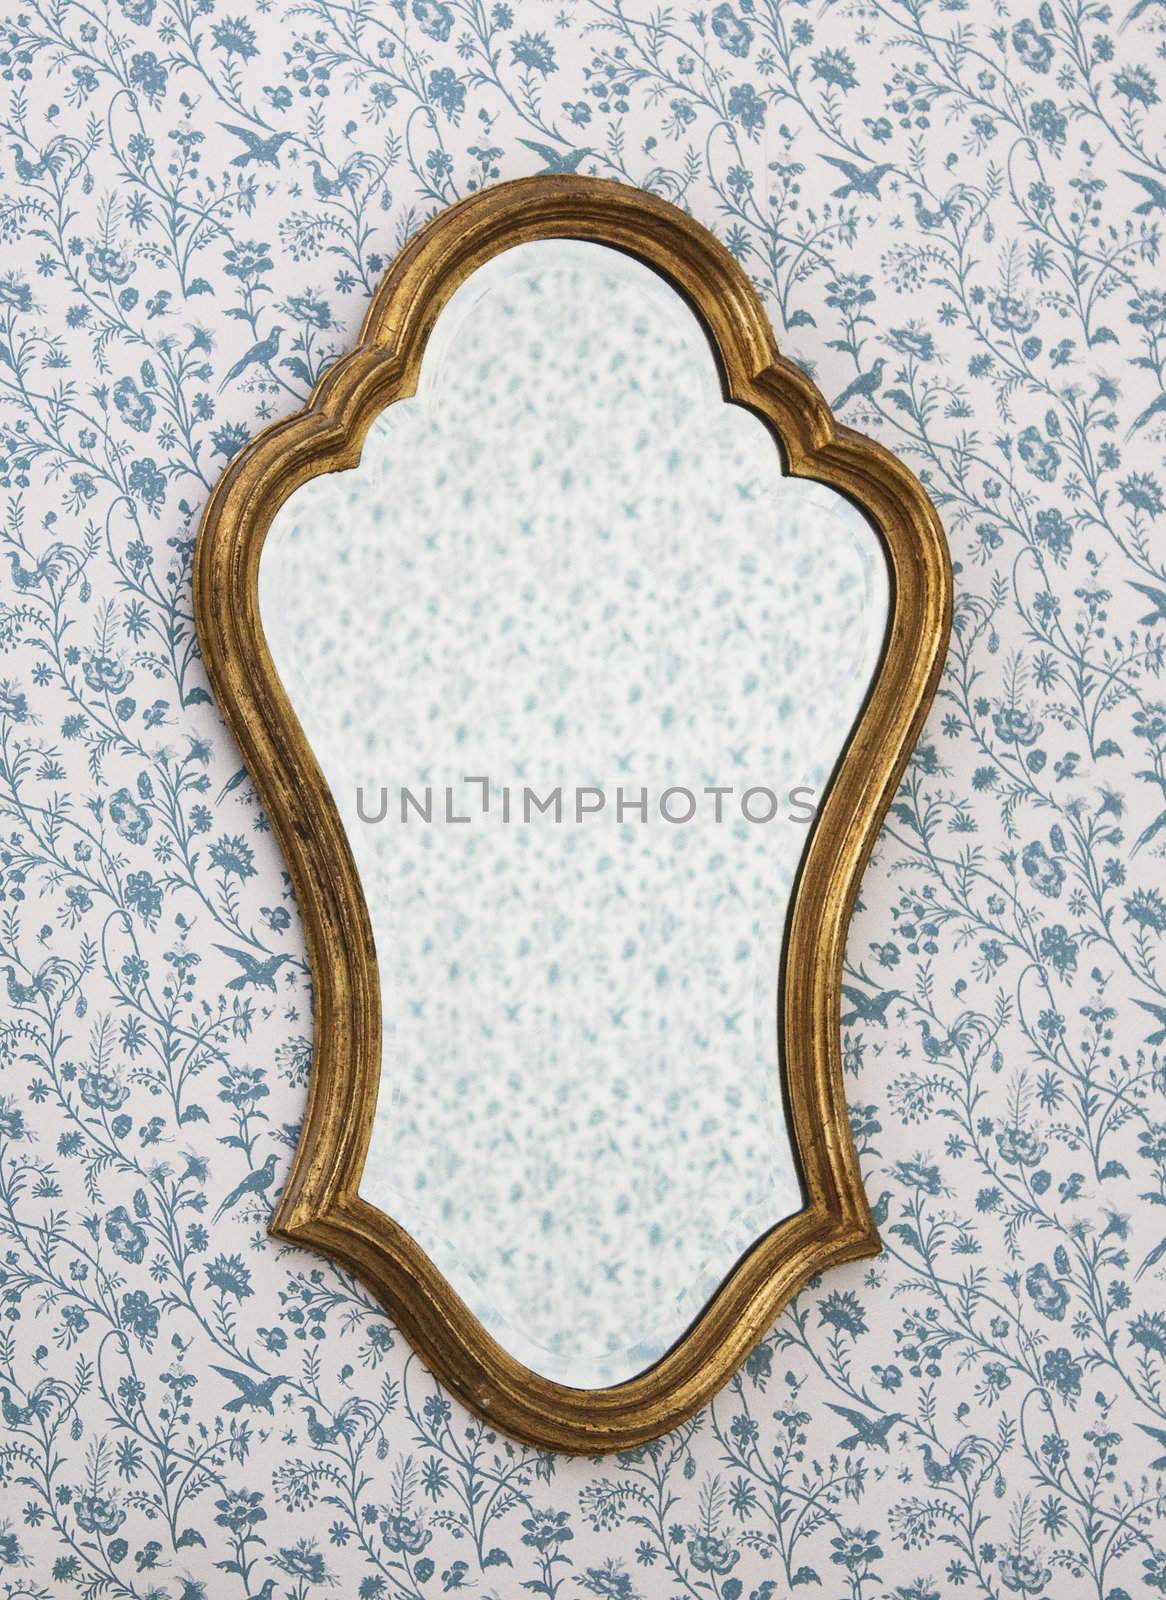 Golden Mirror Frame on Wall with Victorian Wallpaper by Brigida_Soriano